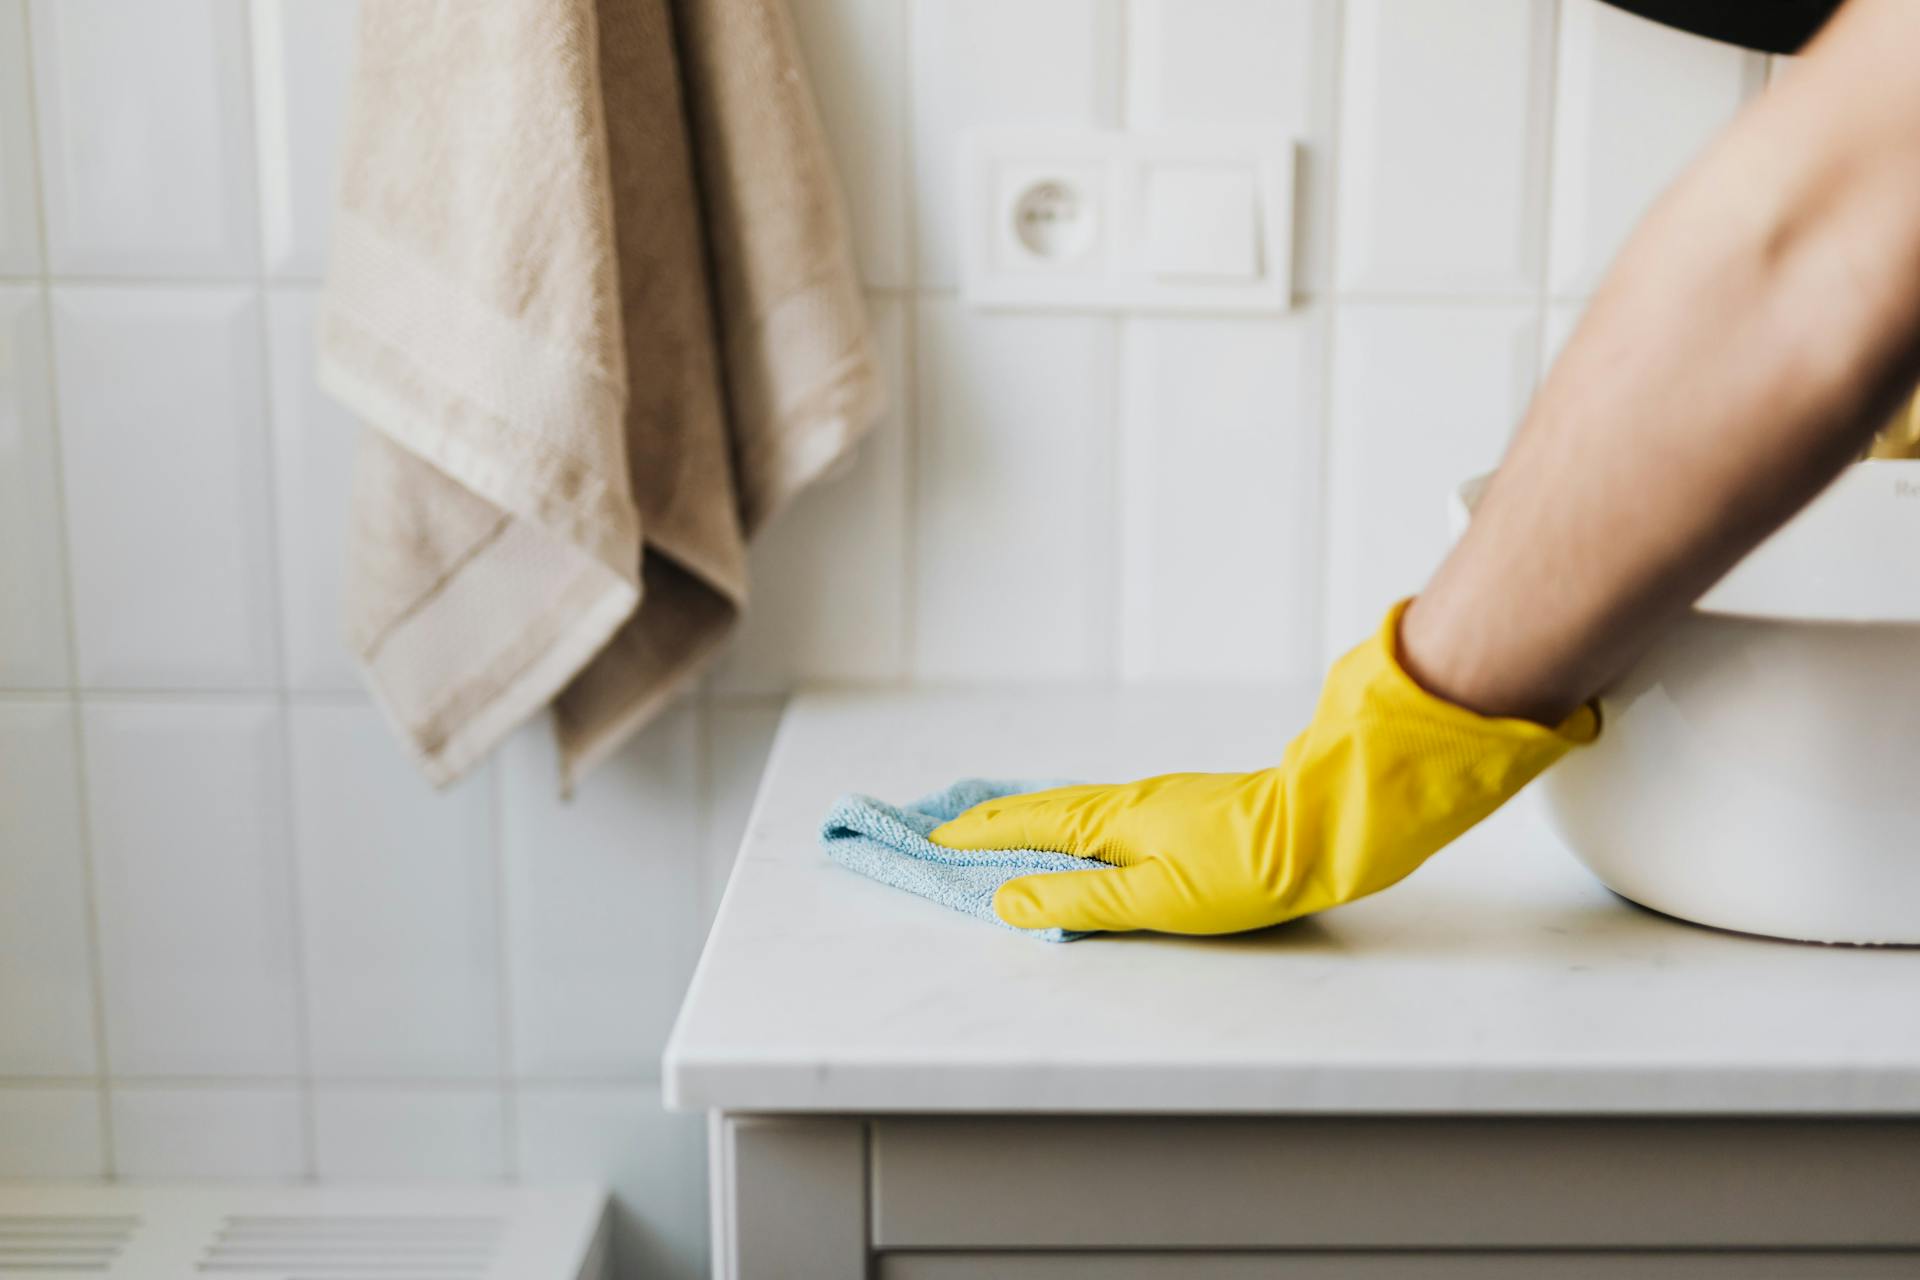 Close-up of a person cleaning | Source: Pexels